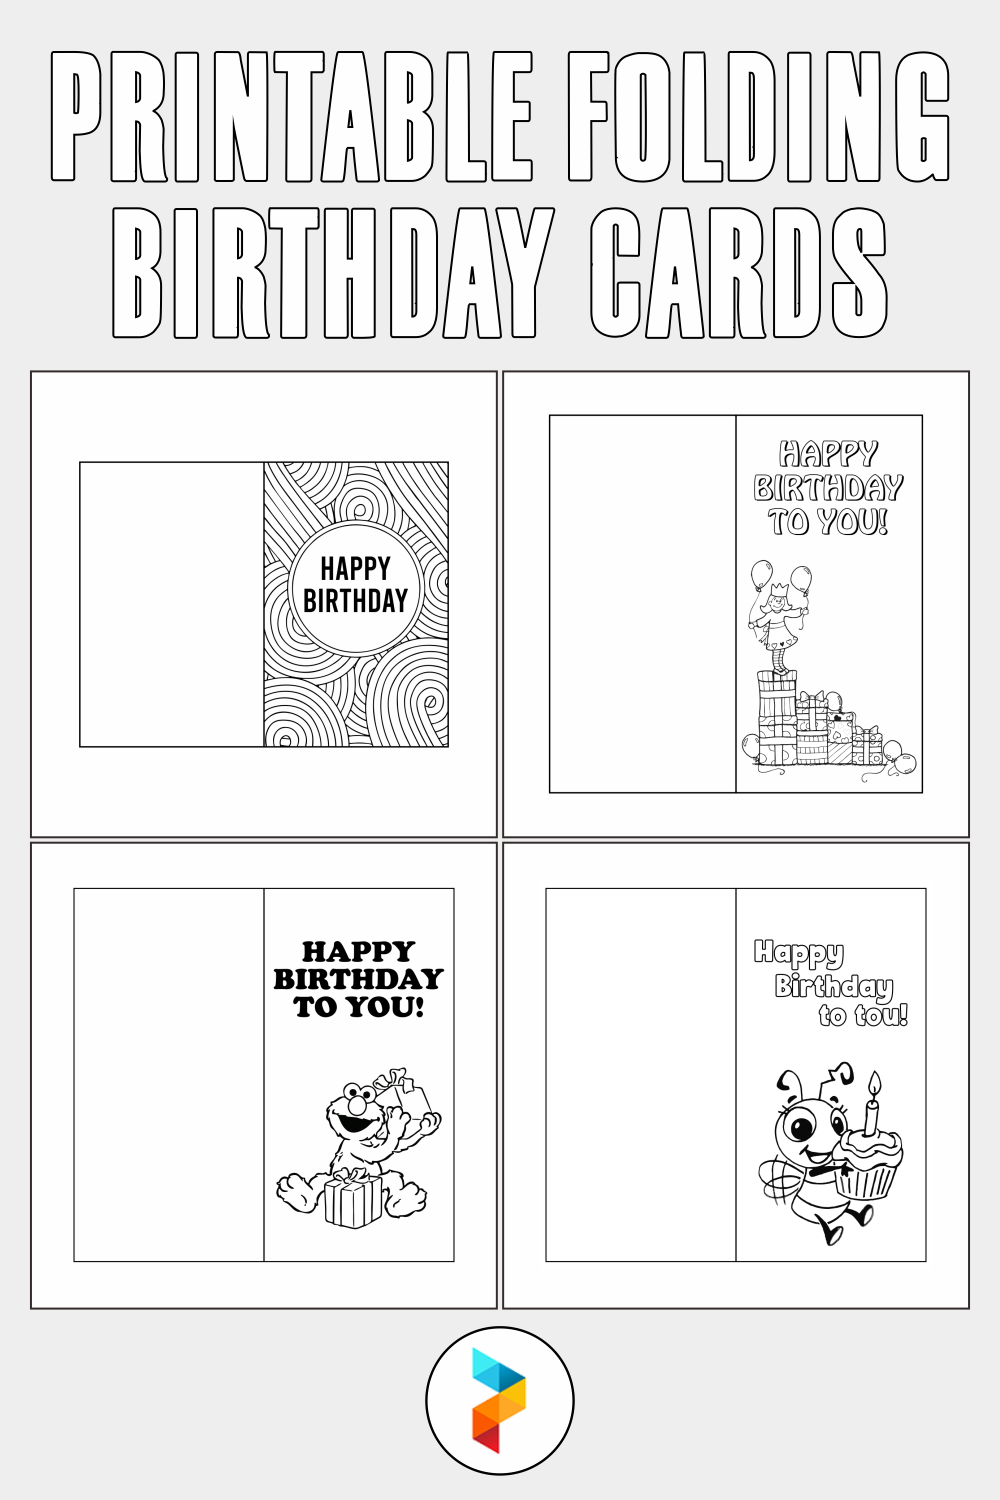 22 Best Printable Folding Birthday Cards - printablee.com Throughout Fold Out Card Template